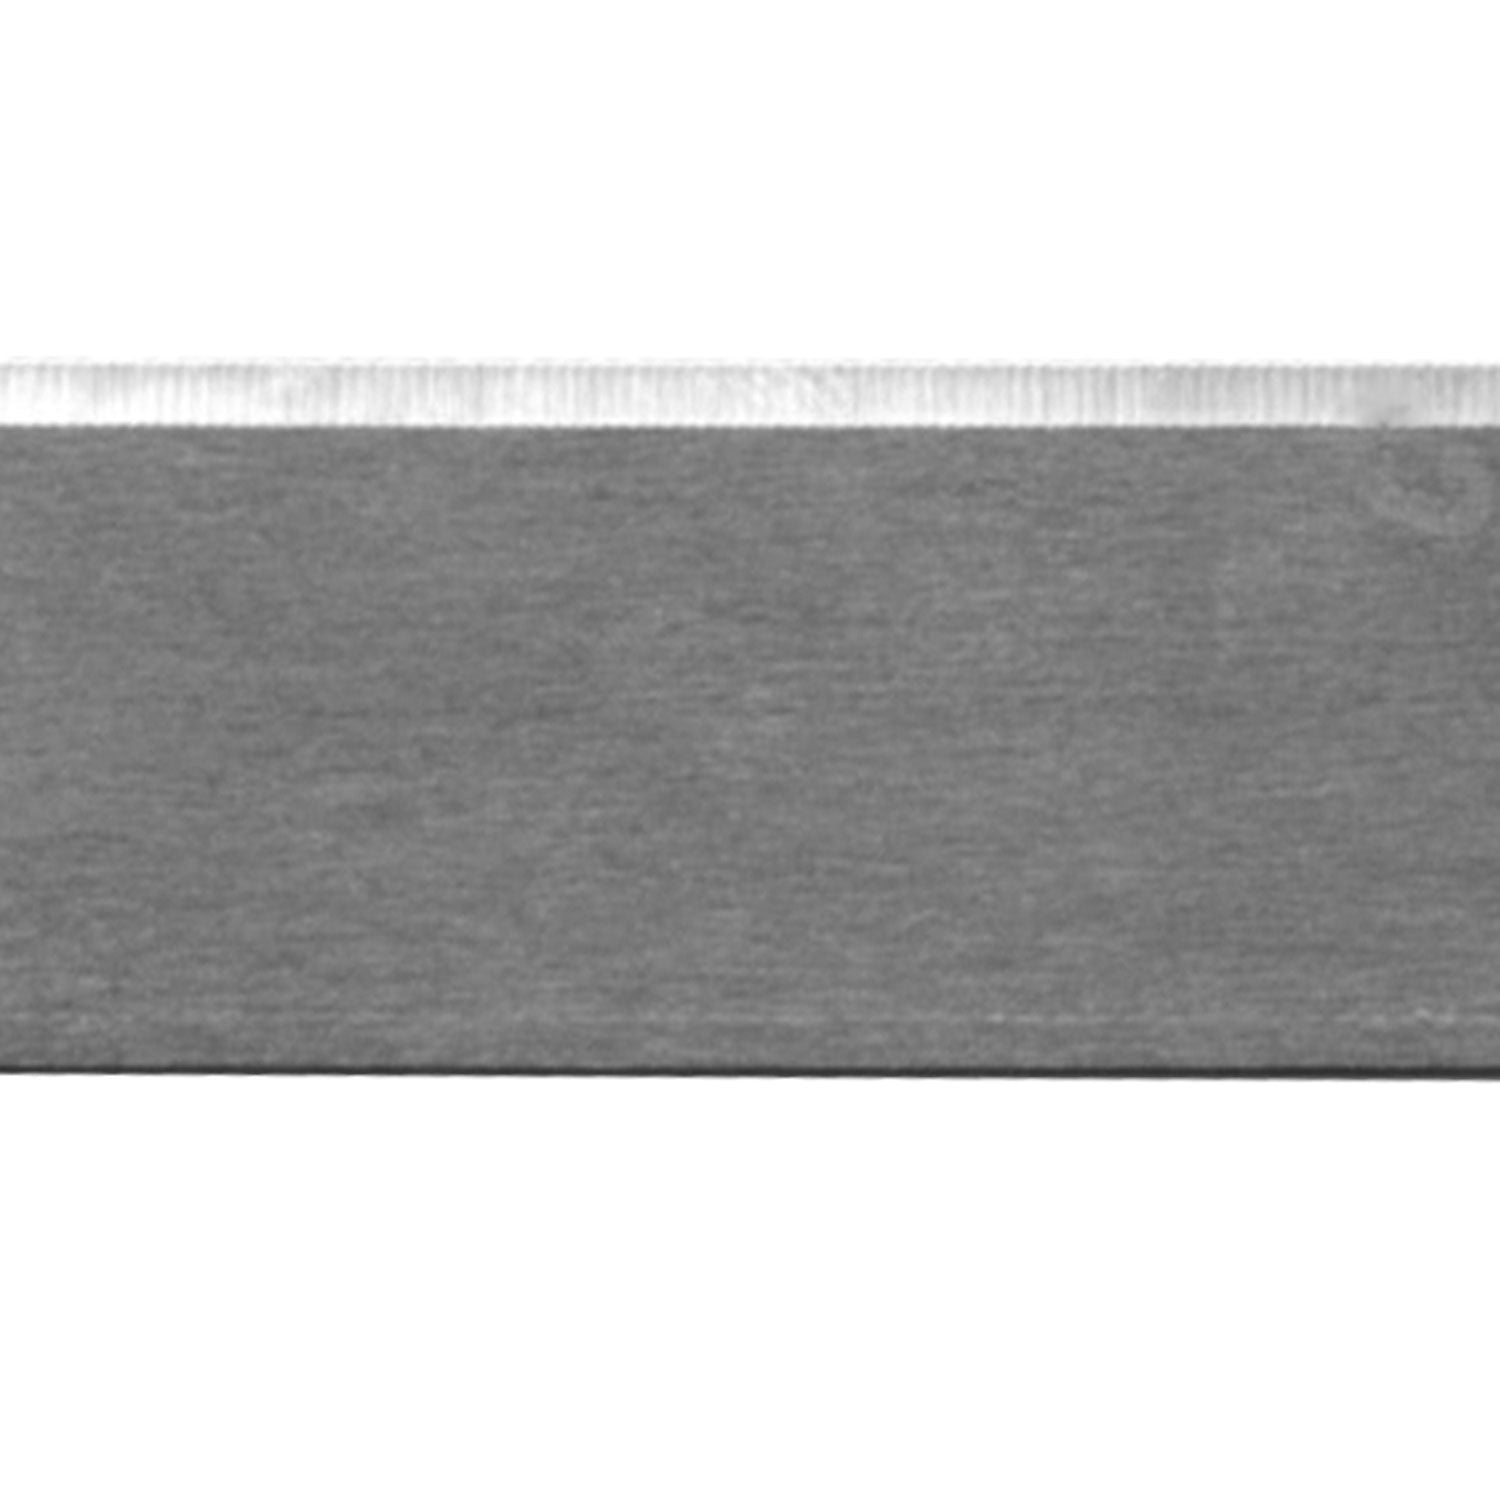 Meat Band Saw Blade - Fish Skinner - Knife Edge - 94 in. x 1.18 in. x .015 in. - Pack of 4